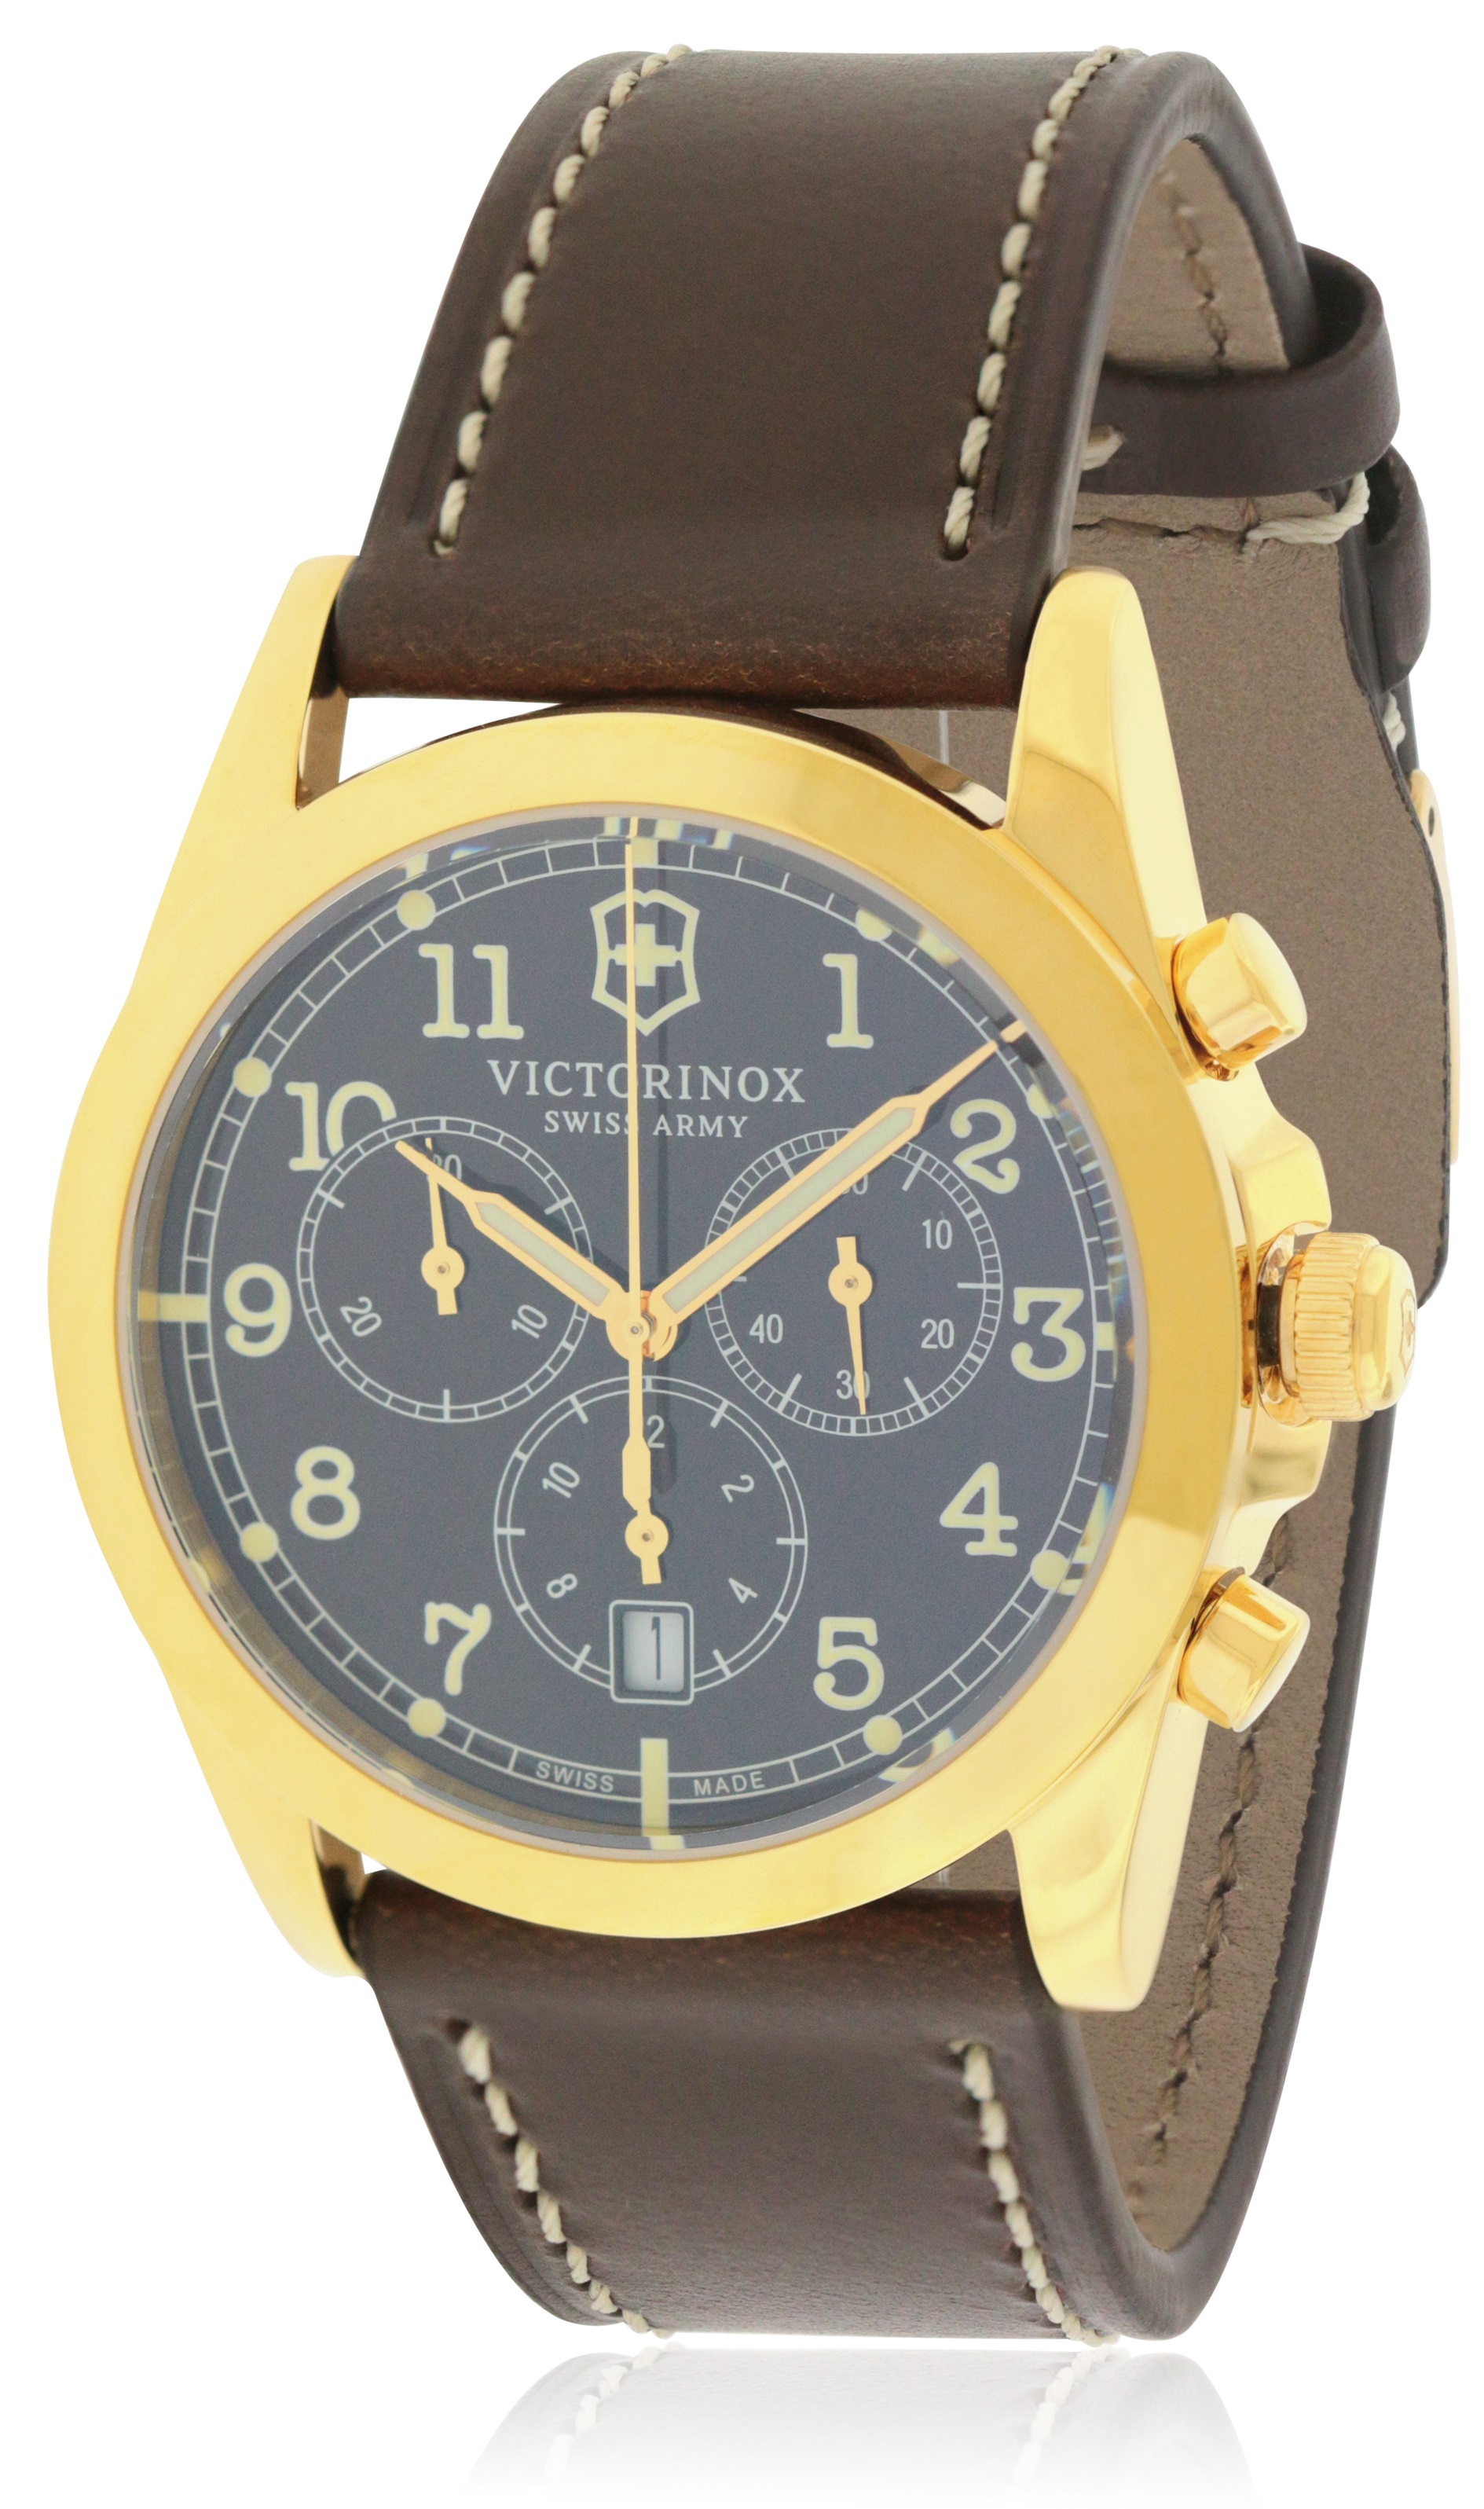 Swiss Army Victorinox Infantry Chronograph Leather Mens Watch 241647